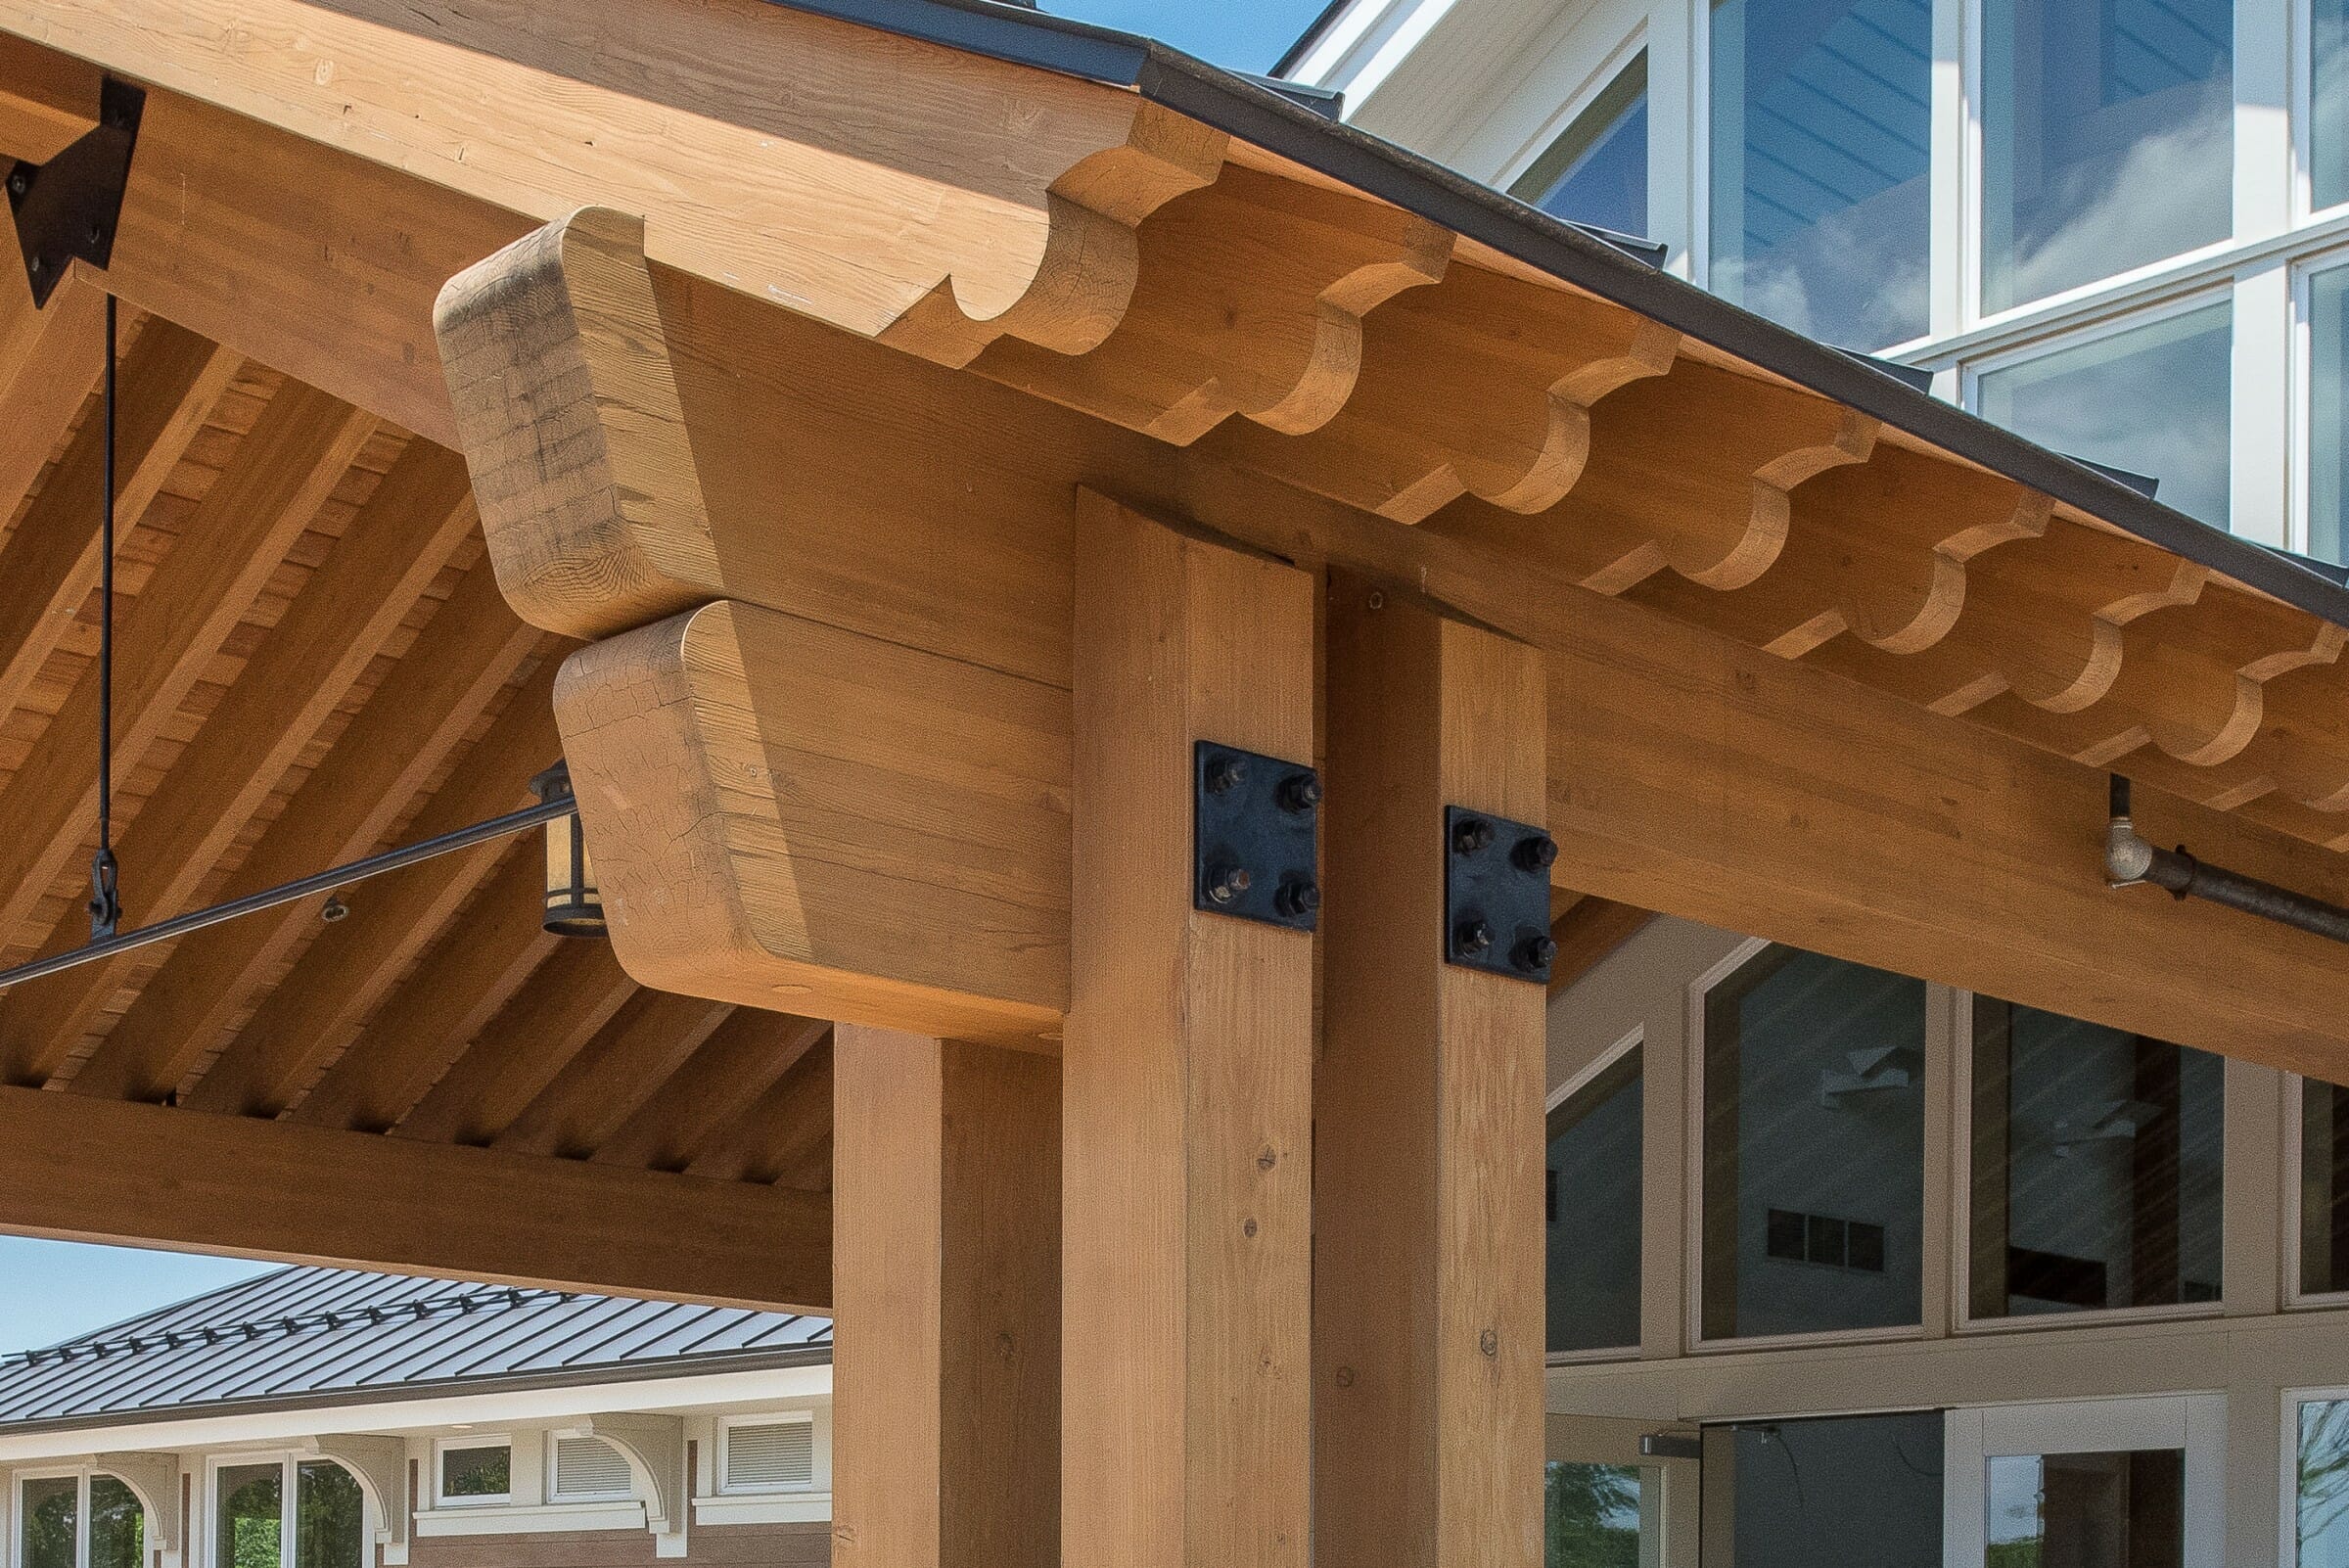 Timber Frame Scrolls on a Porte Cochere with steel plates and tie rods